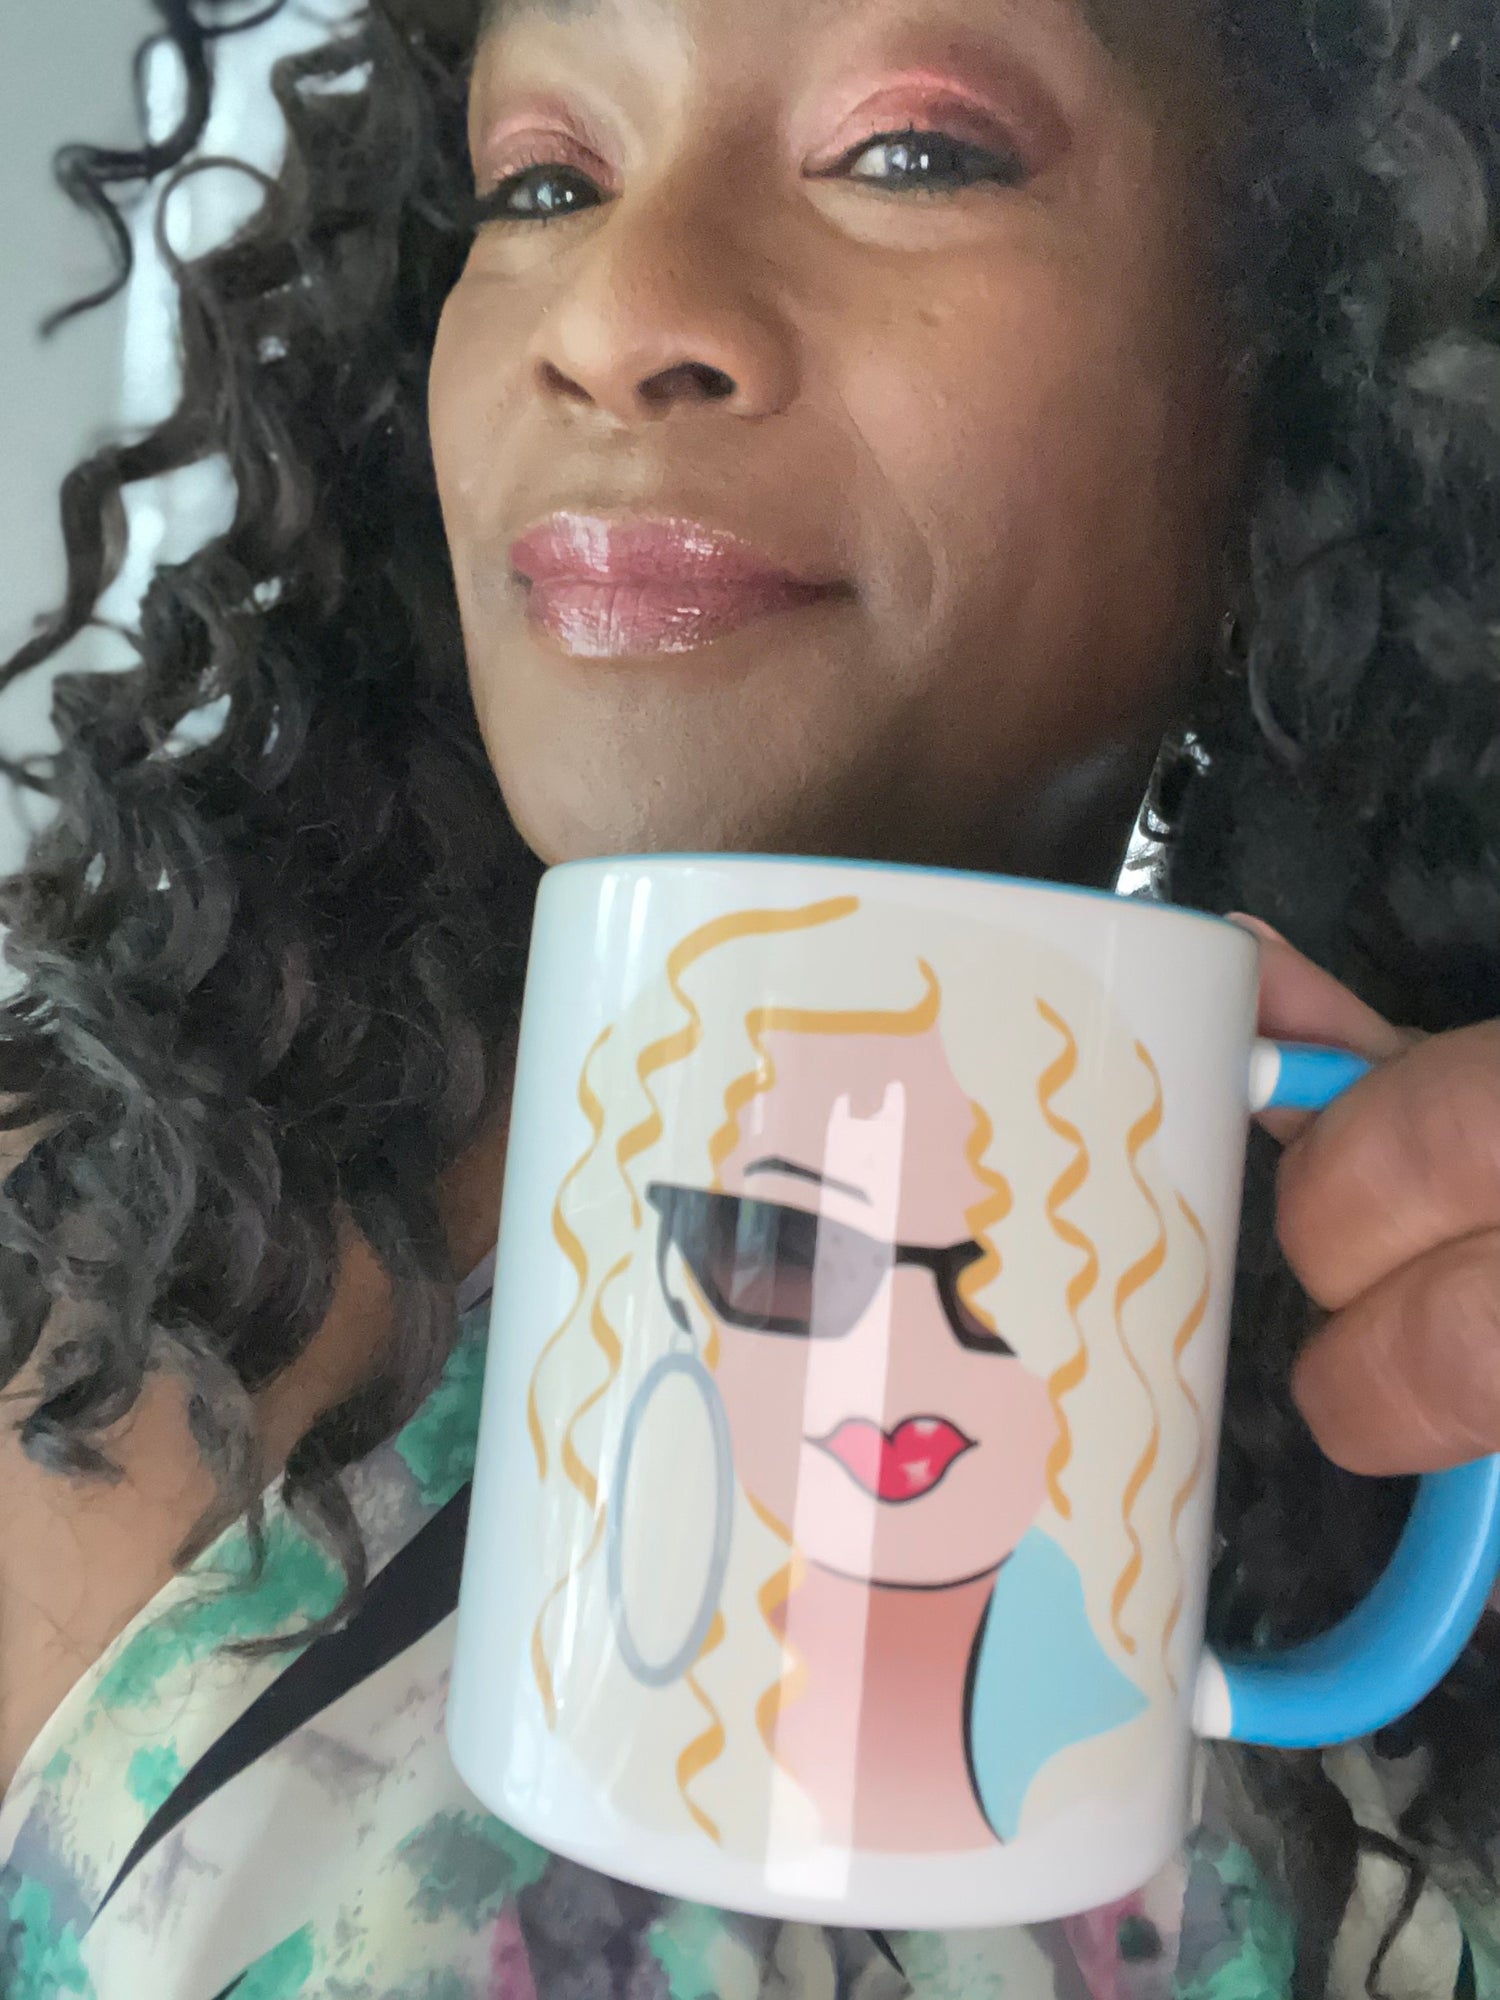 Blonde Girl with sunglasses on a blue and white coffee mug.